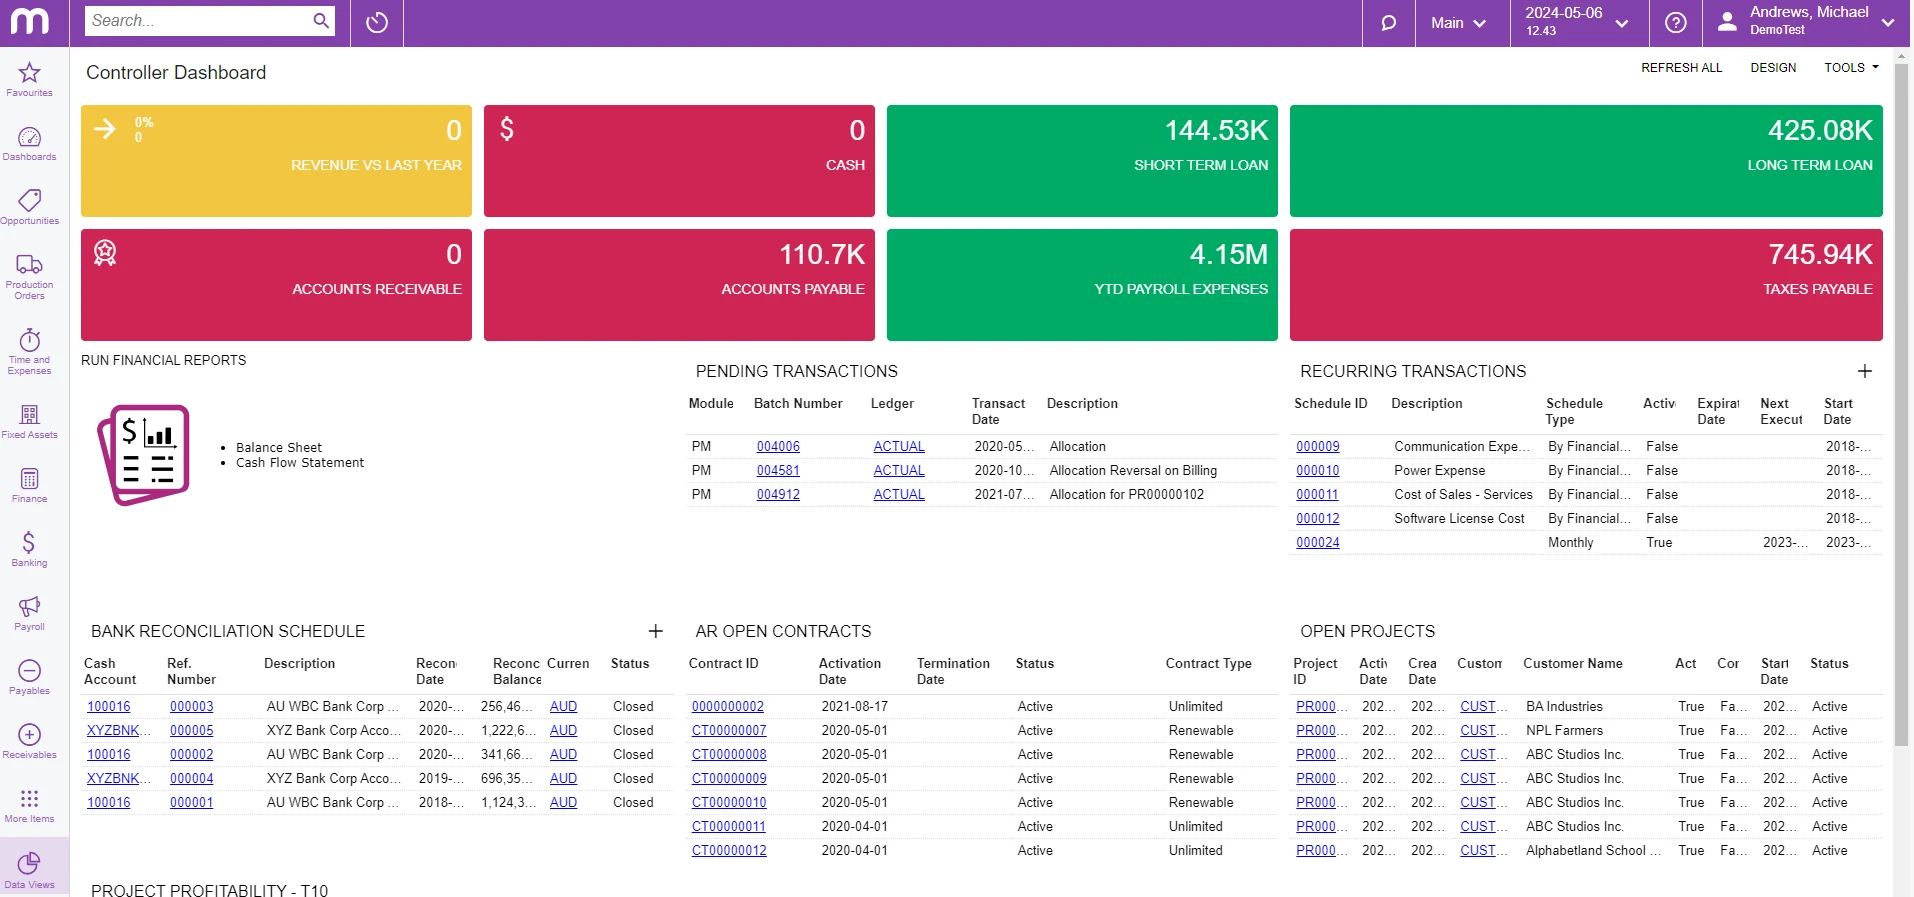 Your finance controller dashboard will show you pending transactions, recurring transactions, bank reconciliations. It also includes open contracts and projects.